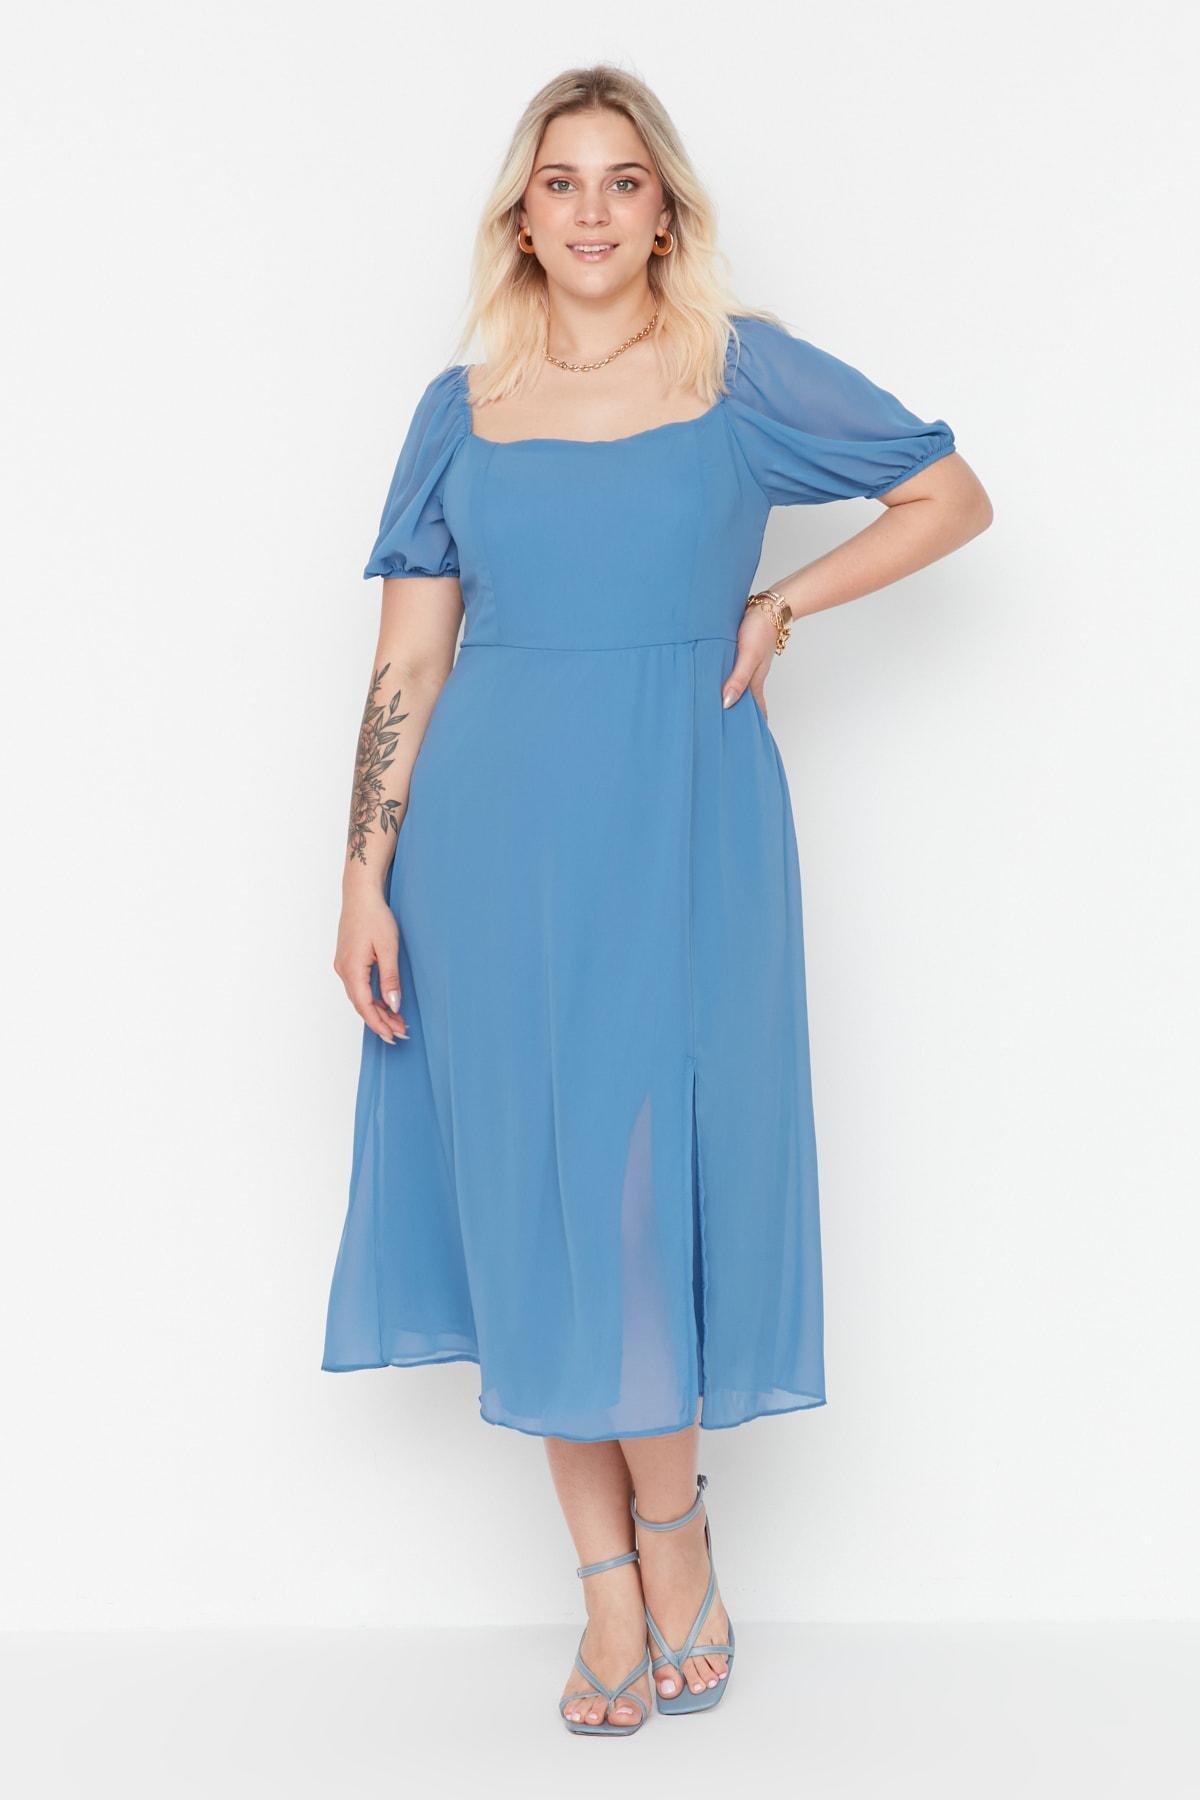 Trendyol midi dress with bust detail in baby blue